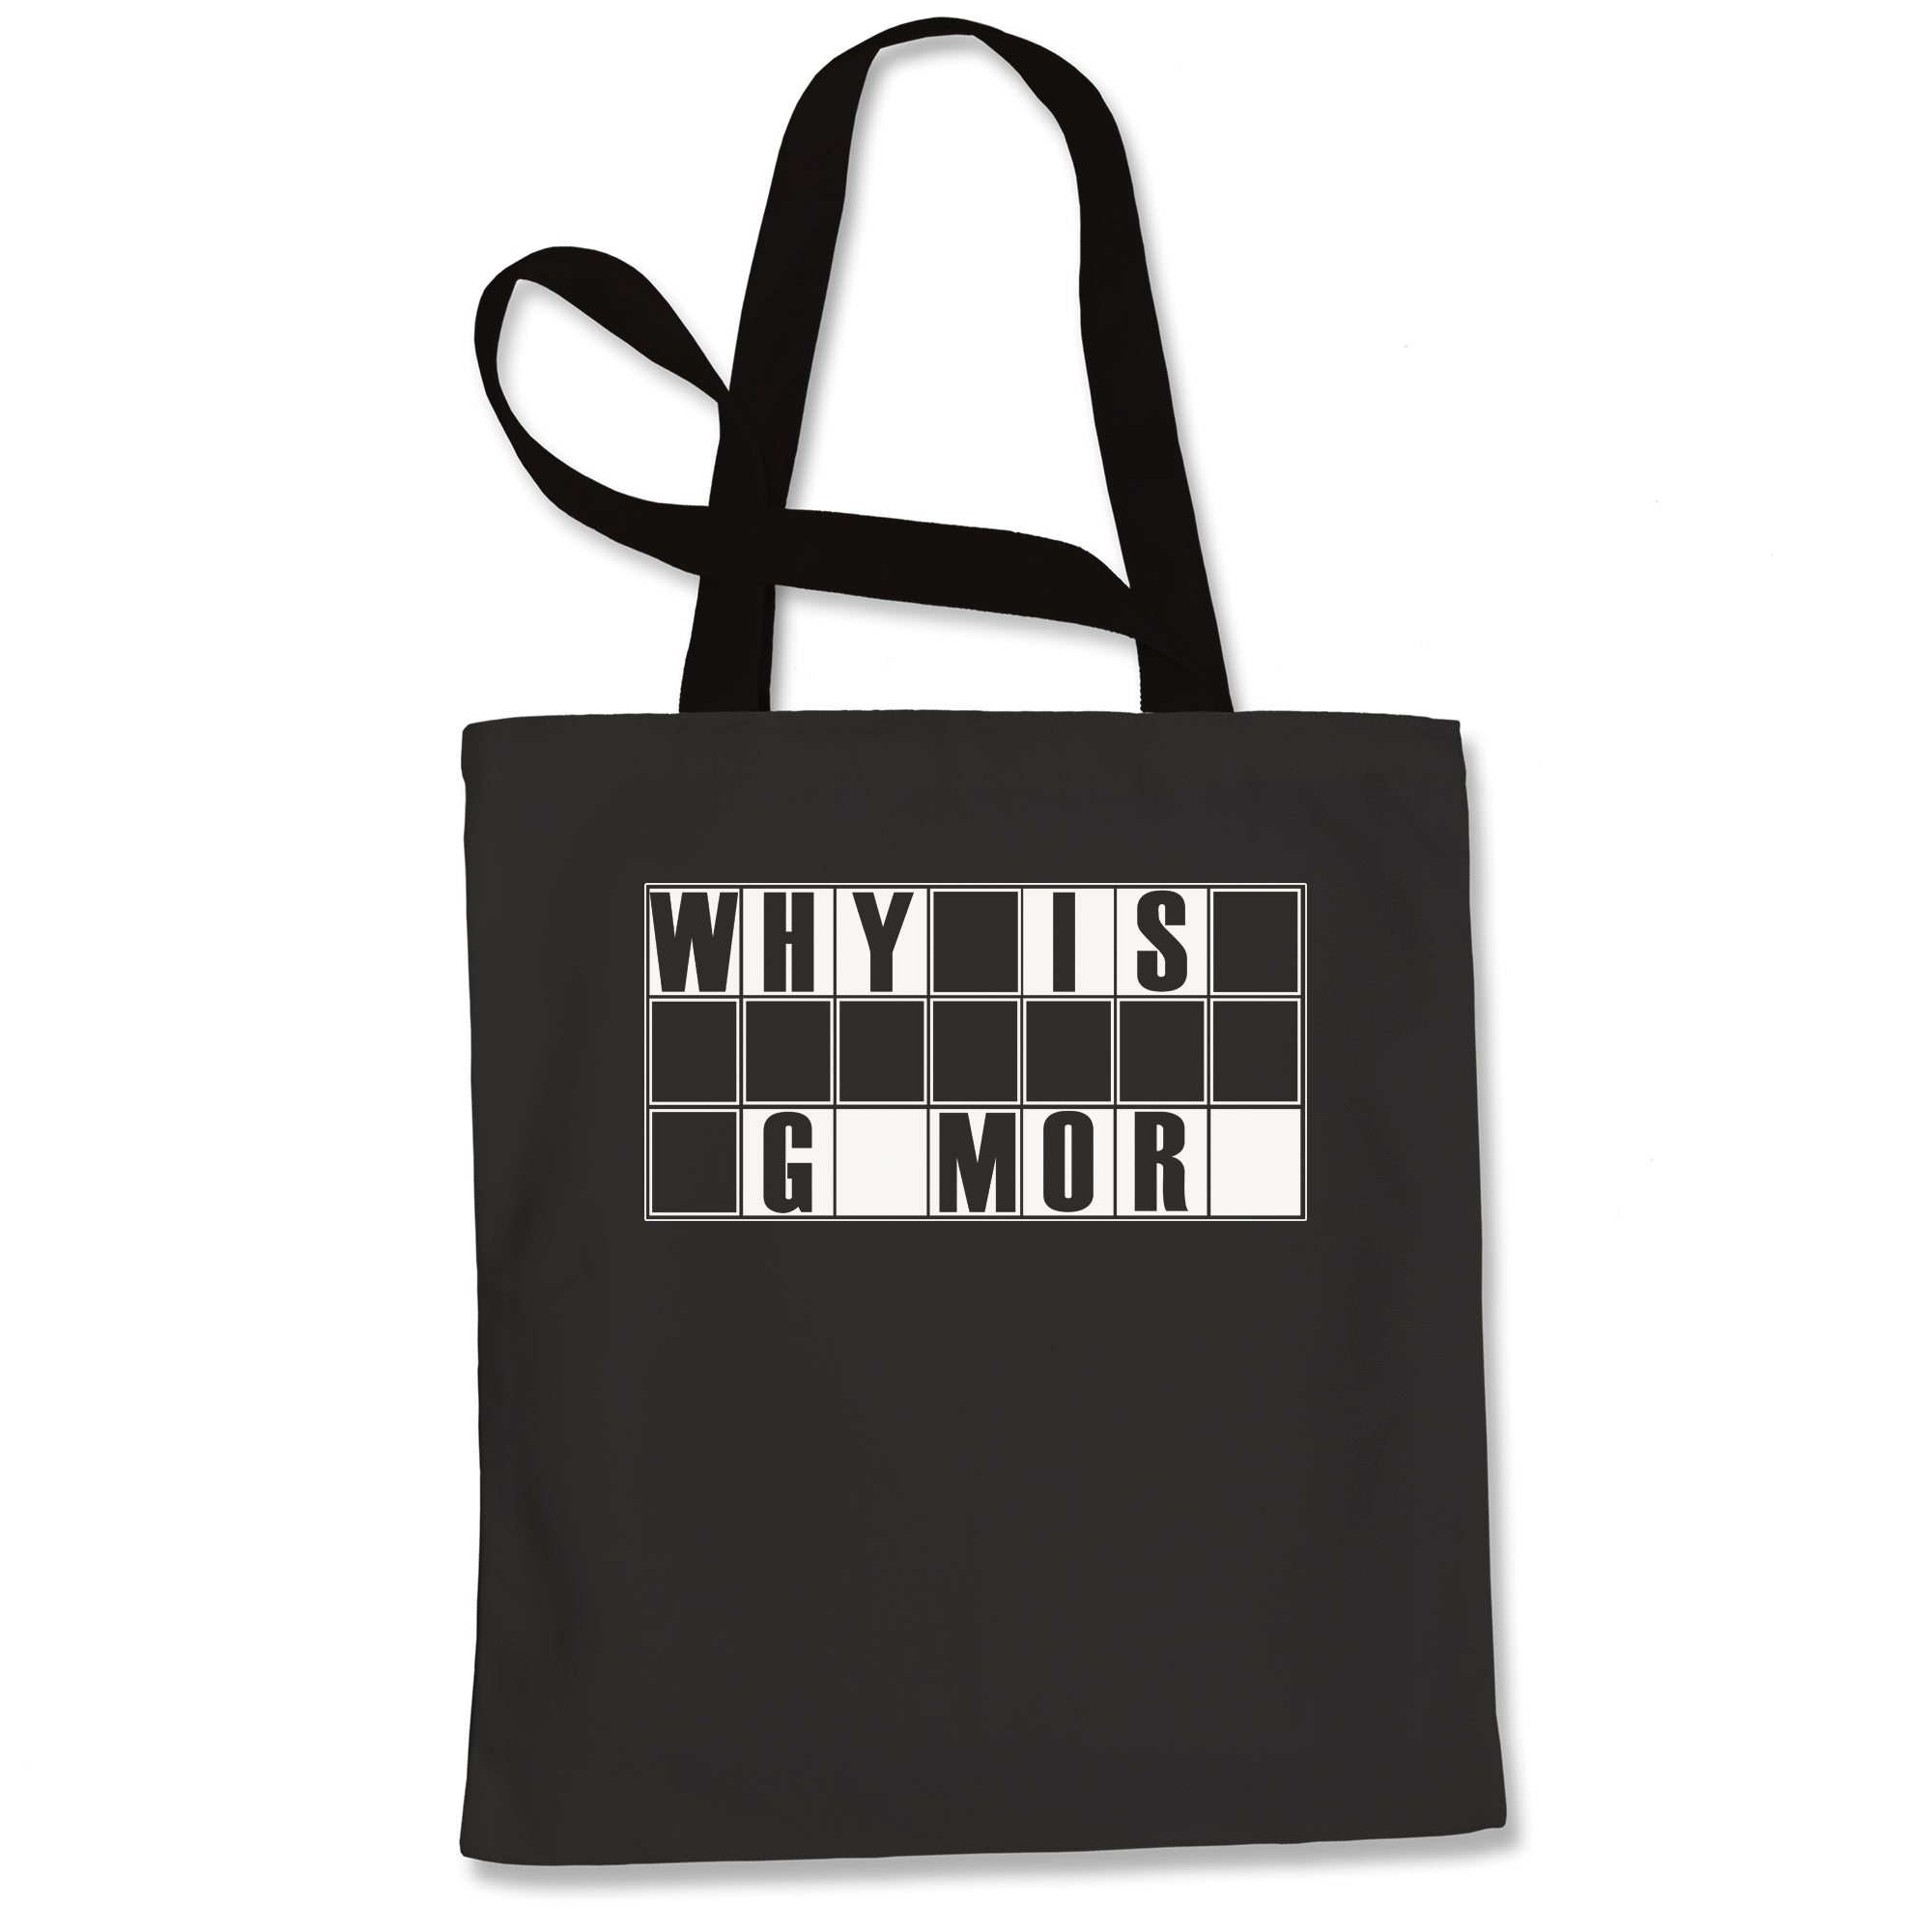 Why is Gamora Funny Wars of Infinity Quote Tote Bag